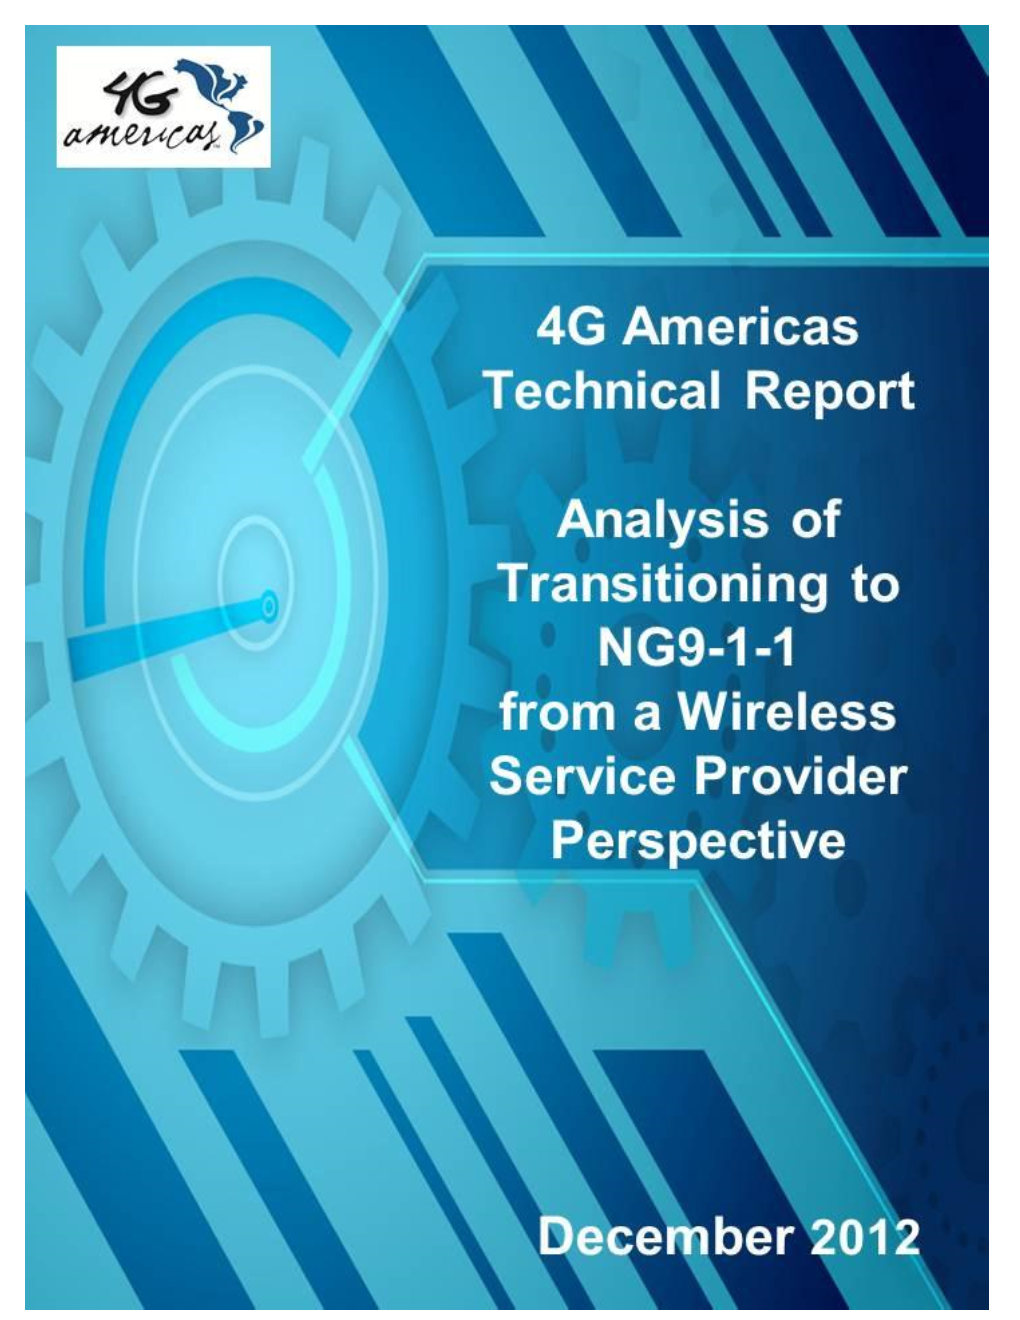 Of 26 4G Americas Technical Report – Analysis of Transitioning to NG9-1-1 from a Wireless Service Provider Perspective TABLE of CONTENTS